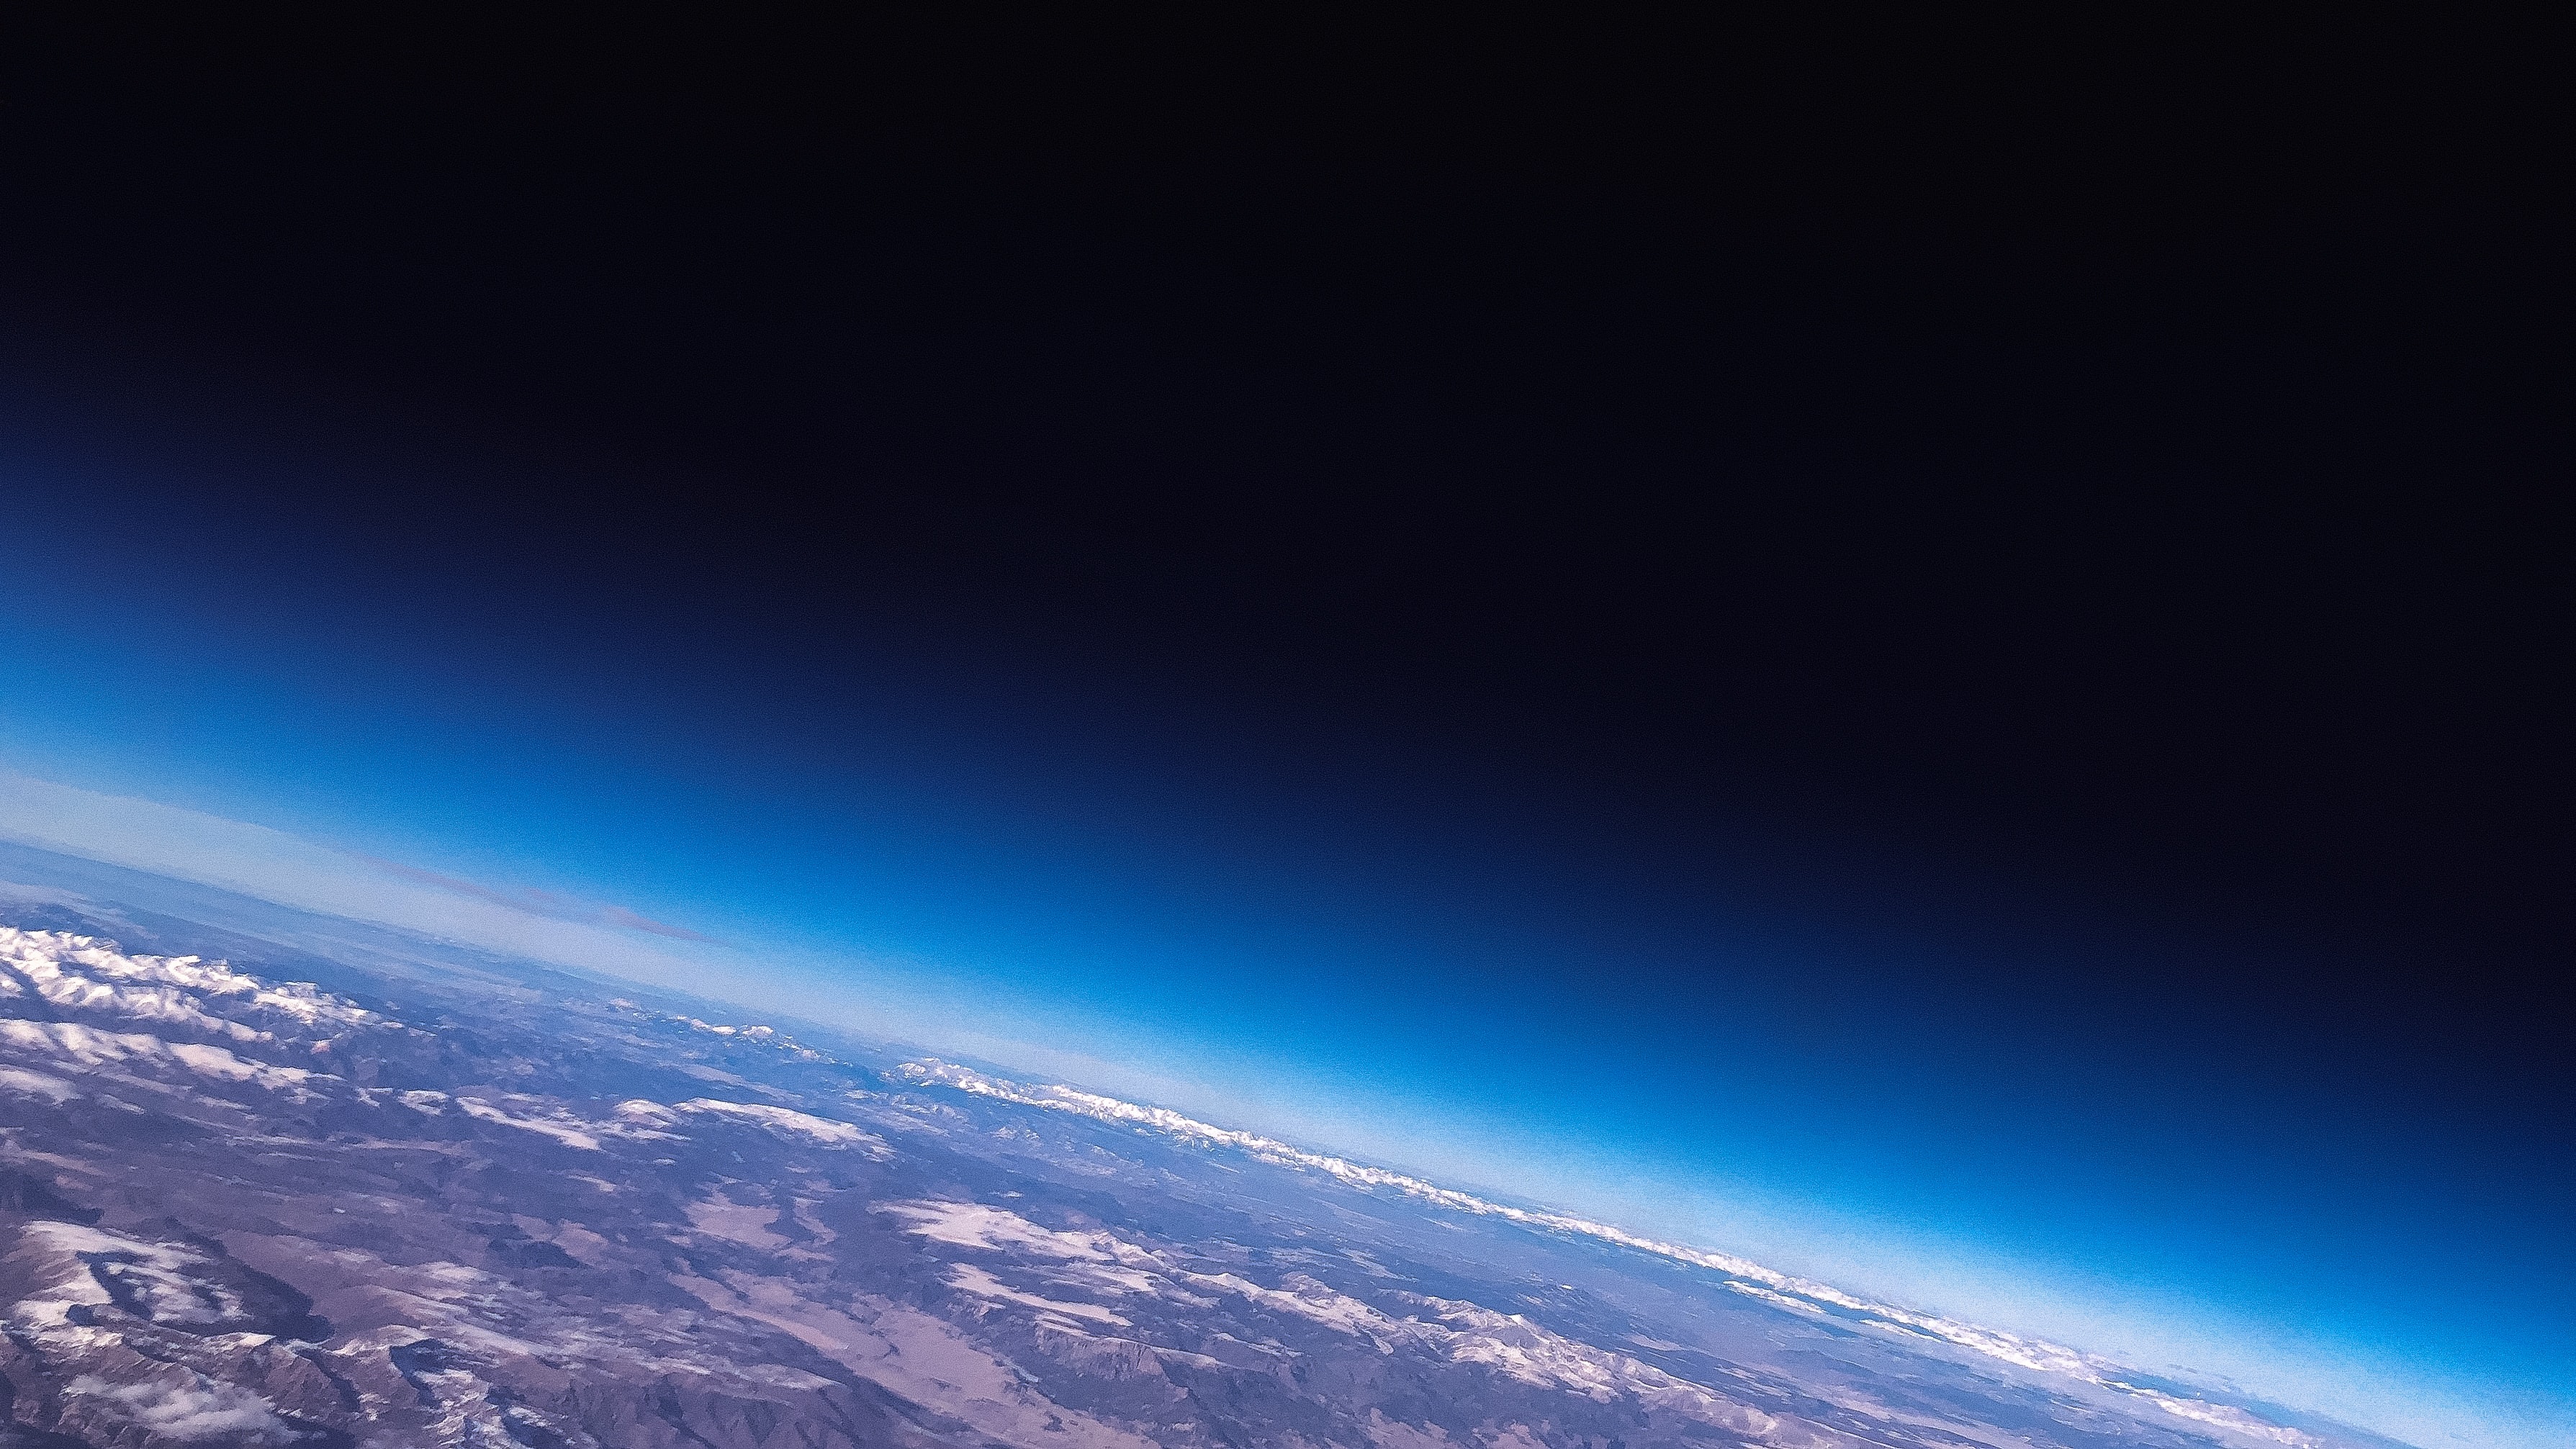 The background image of this site, a photo of Earth from space. The camera is close enough that Earth is only partially visible, and one can see its atmosphere around the planet.